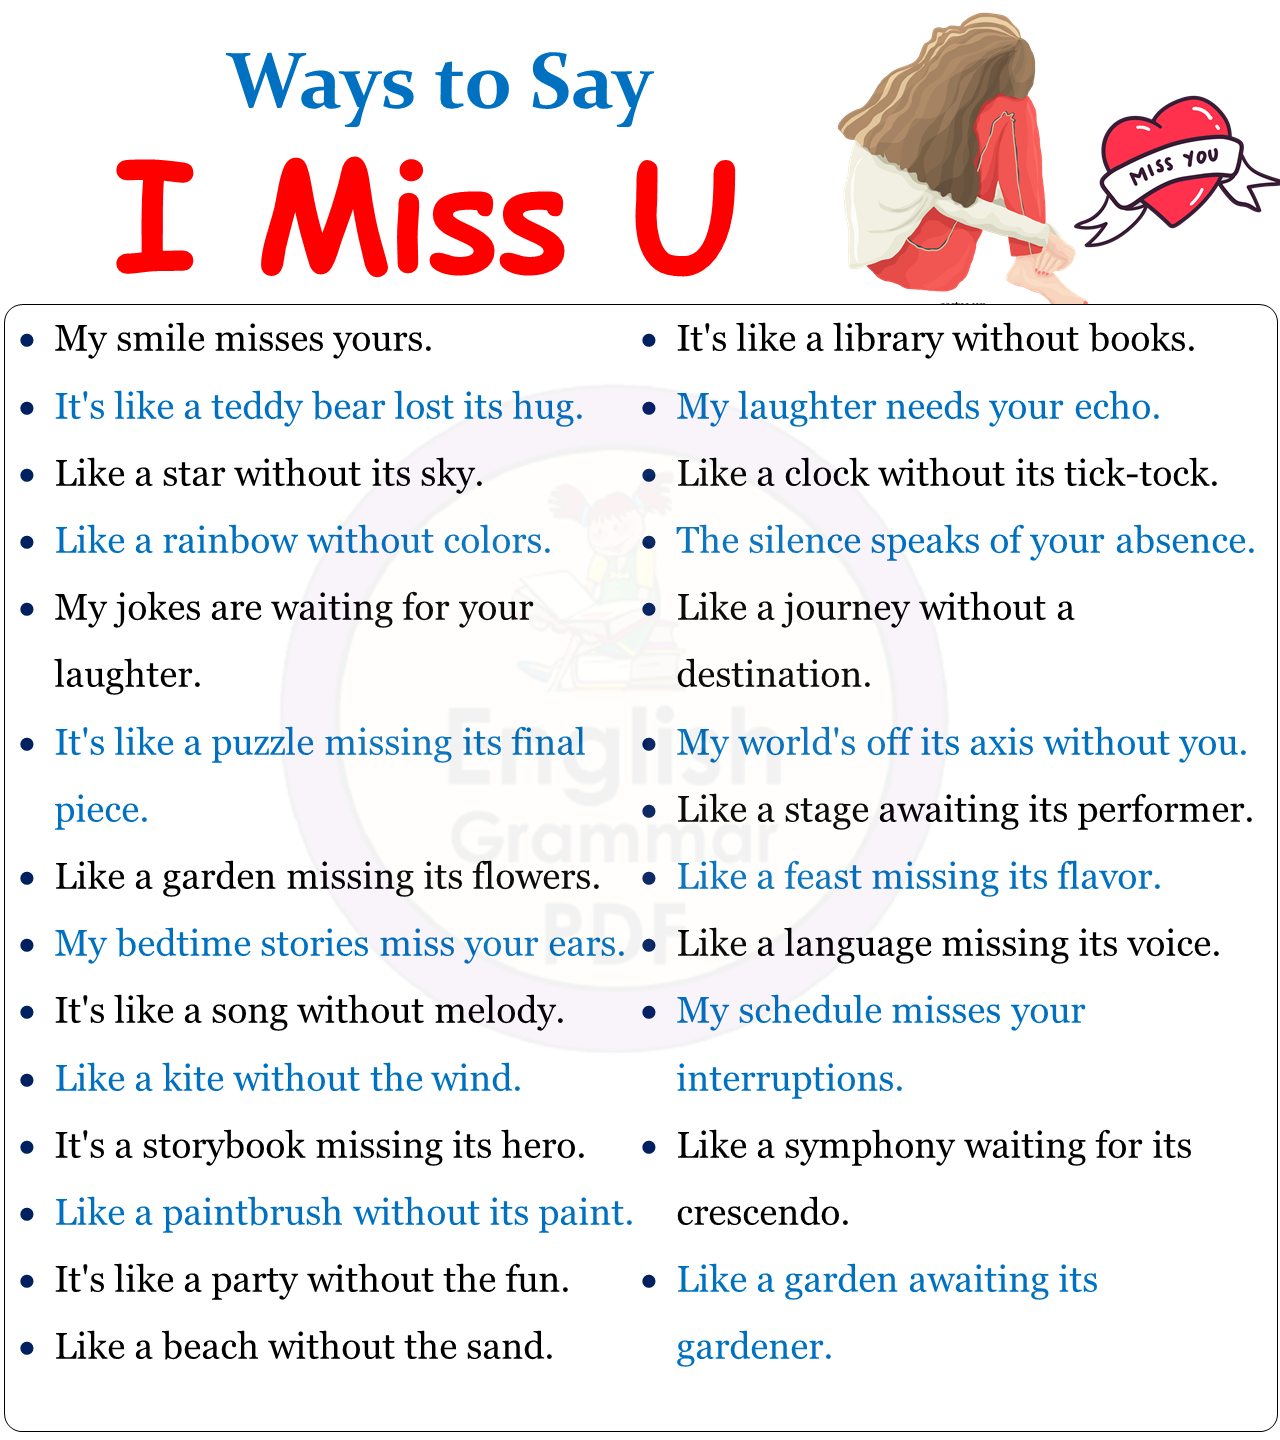 Ways to say I Miss You